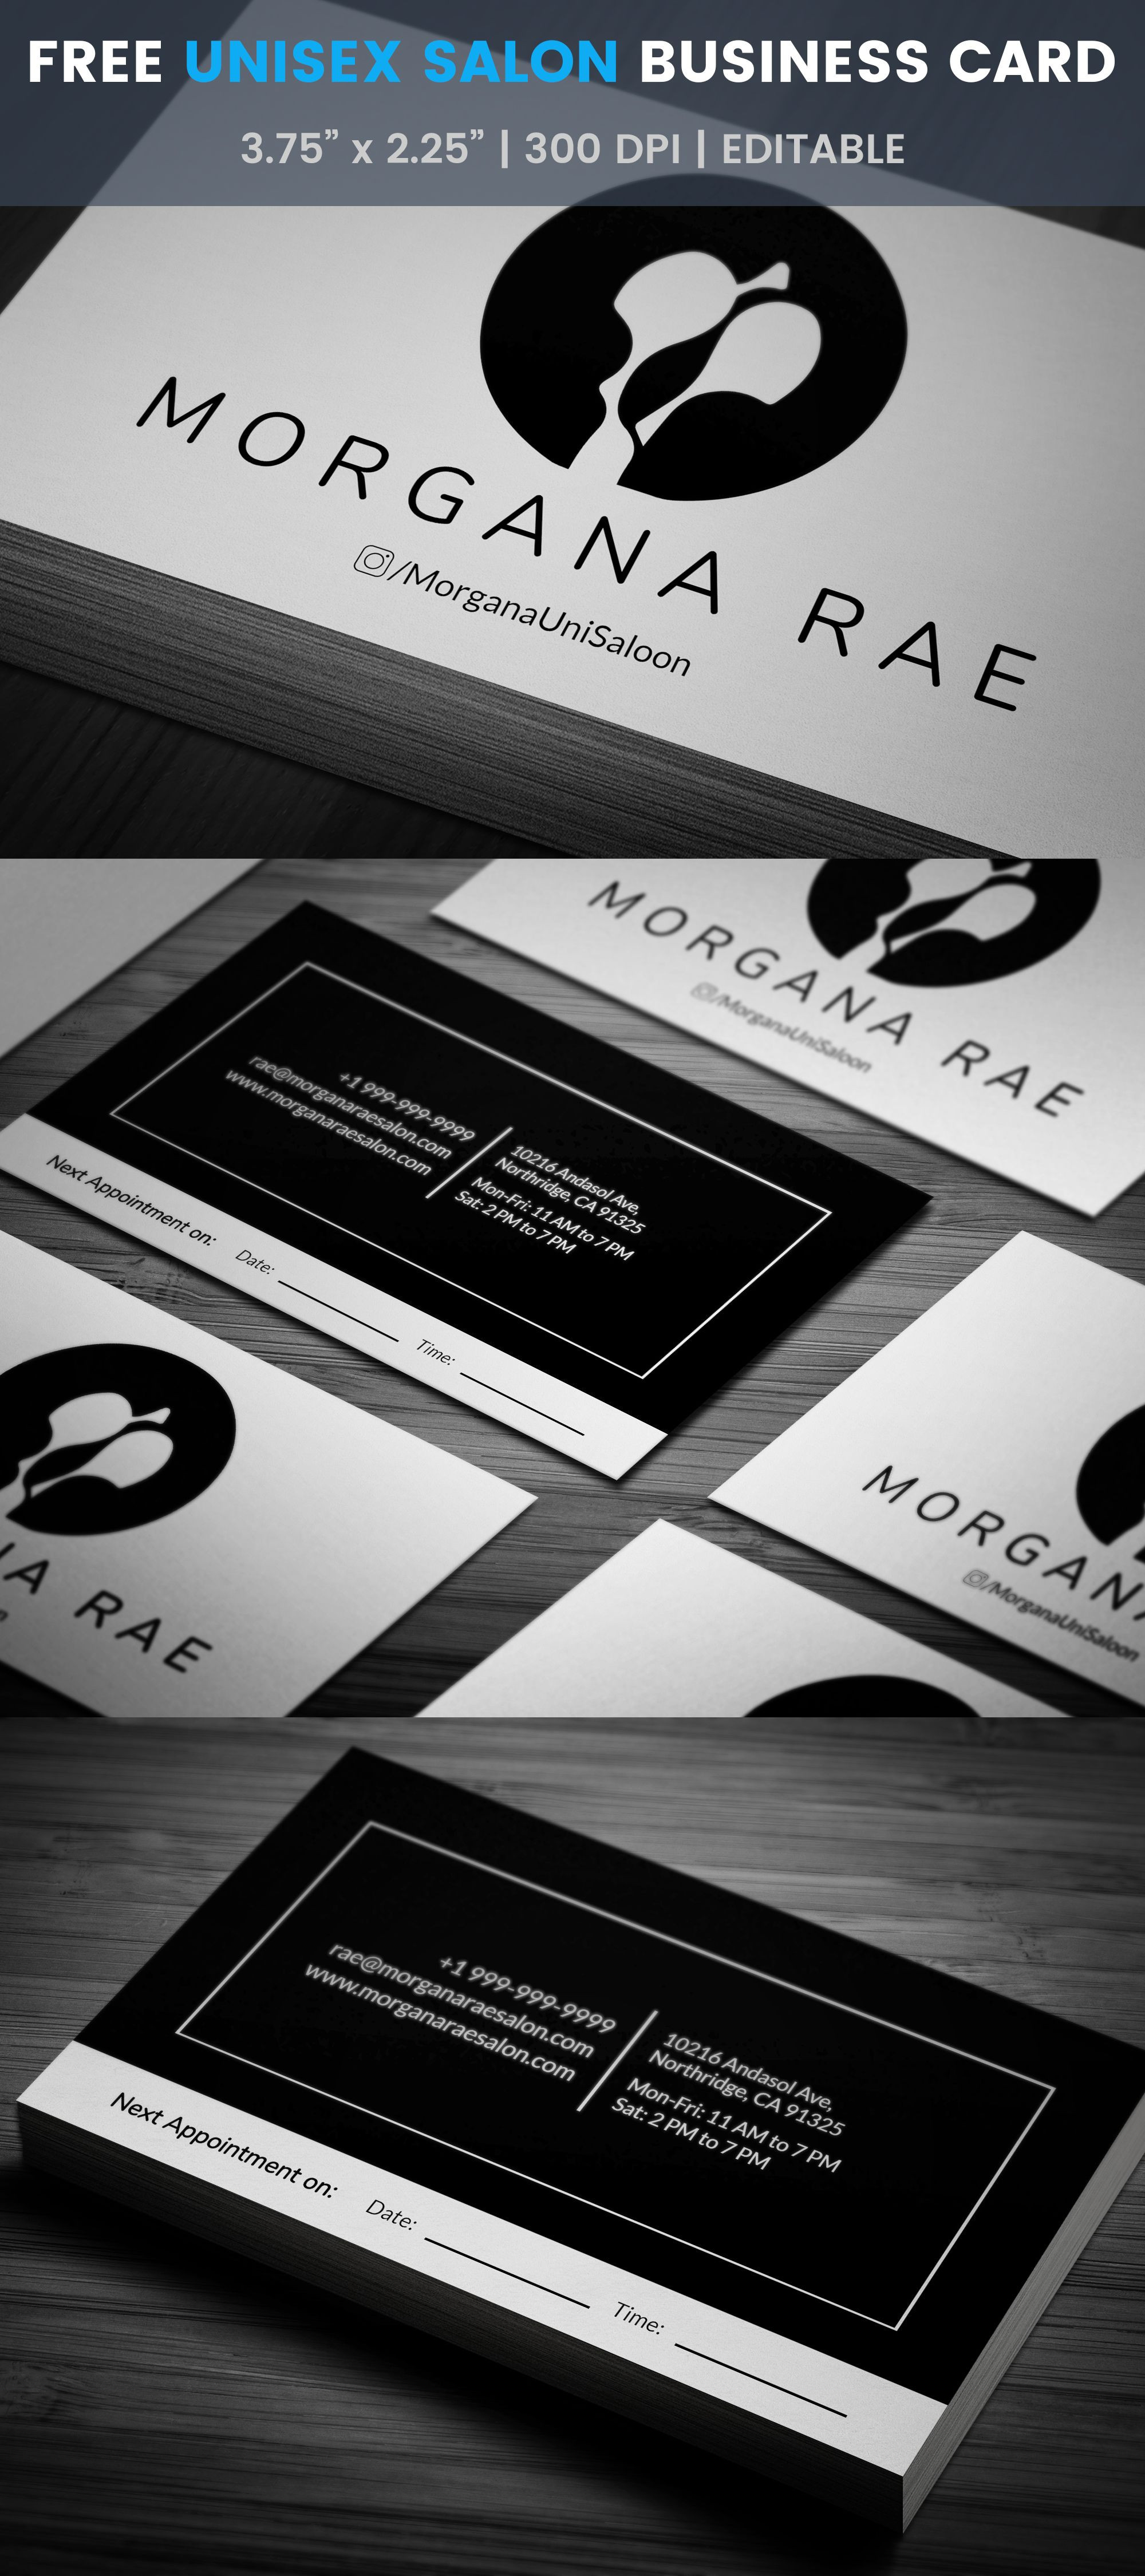 Uni Hair Salon Business Card Template Look Style Of Design A Business Card Free Template